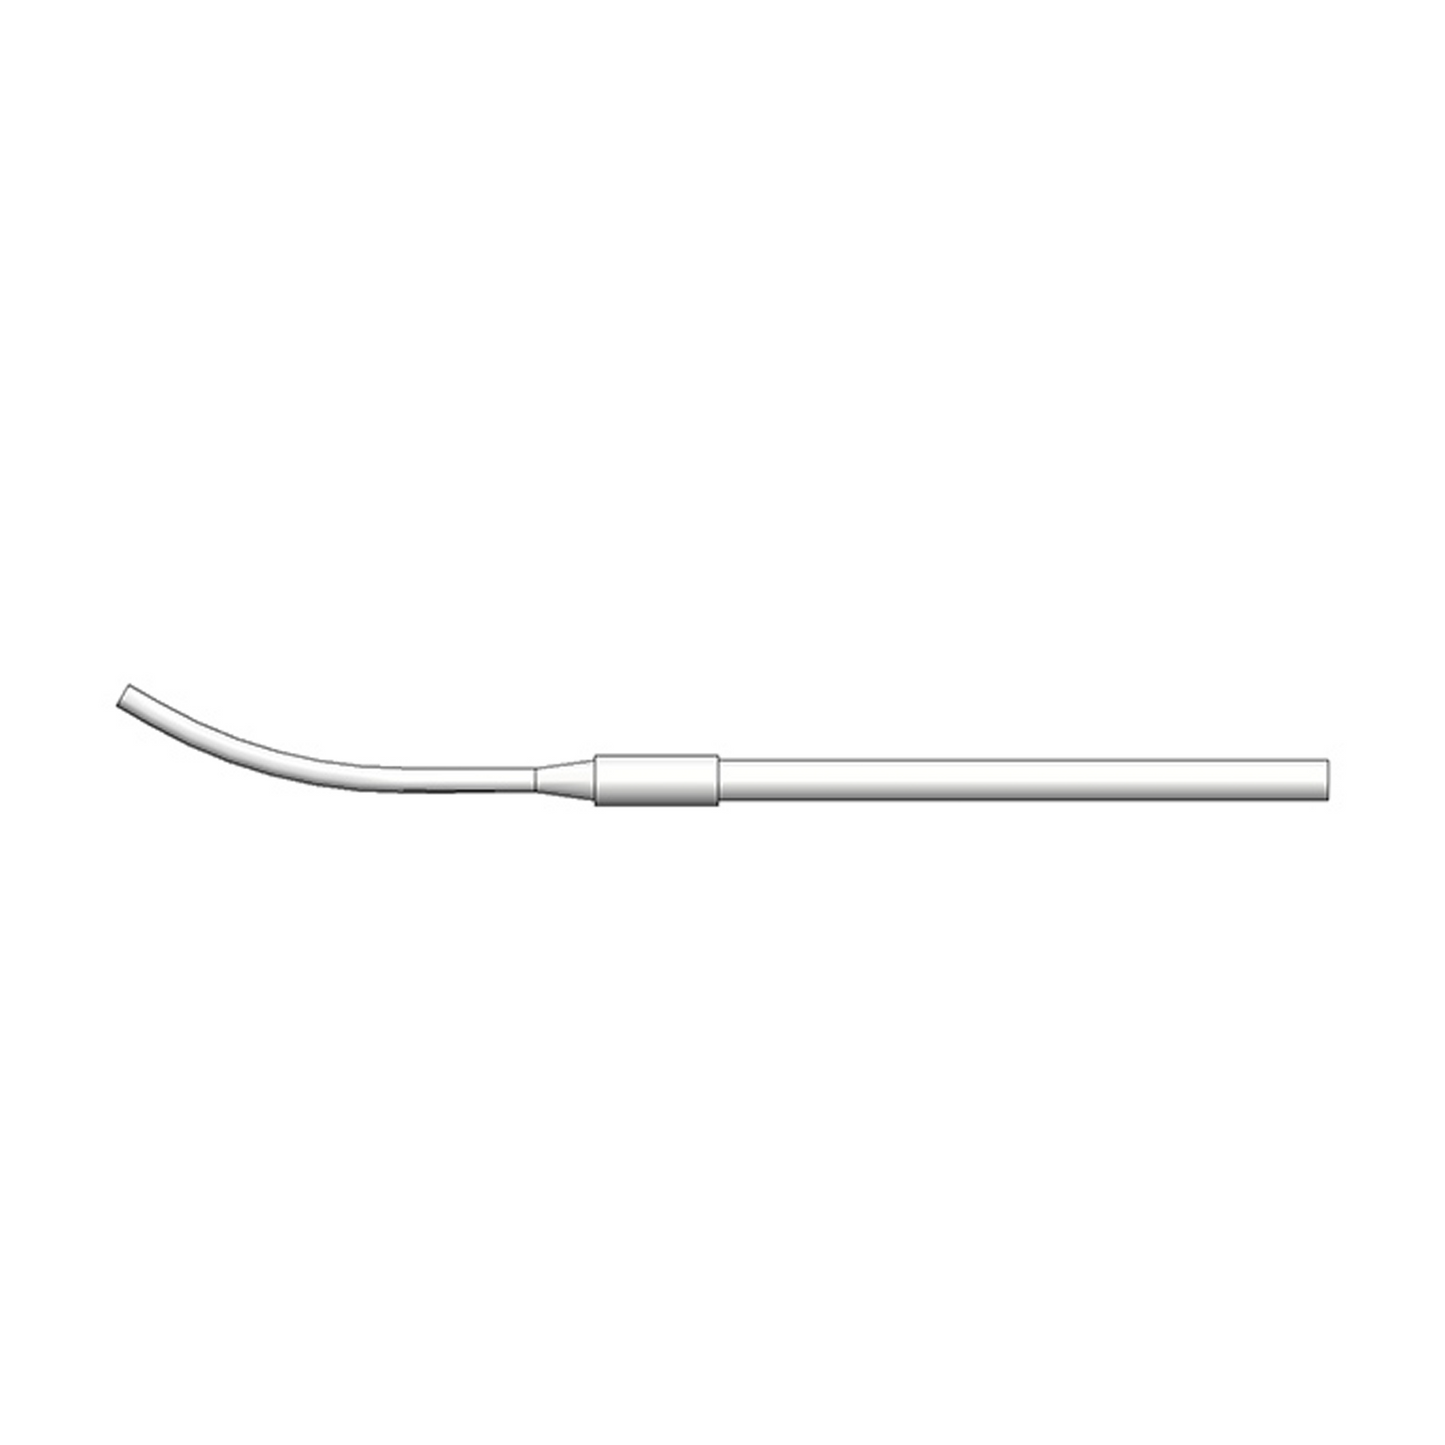 Hakko Products_ B5273 Feed pipe assembly 0.8mm_ Soldering Accessories_ Hakko Products